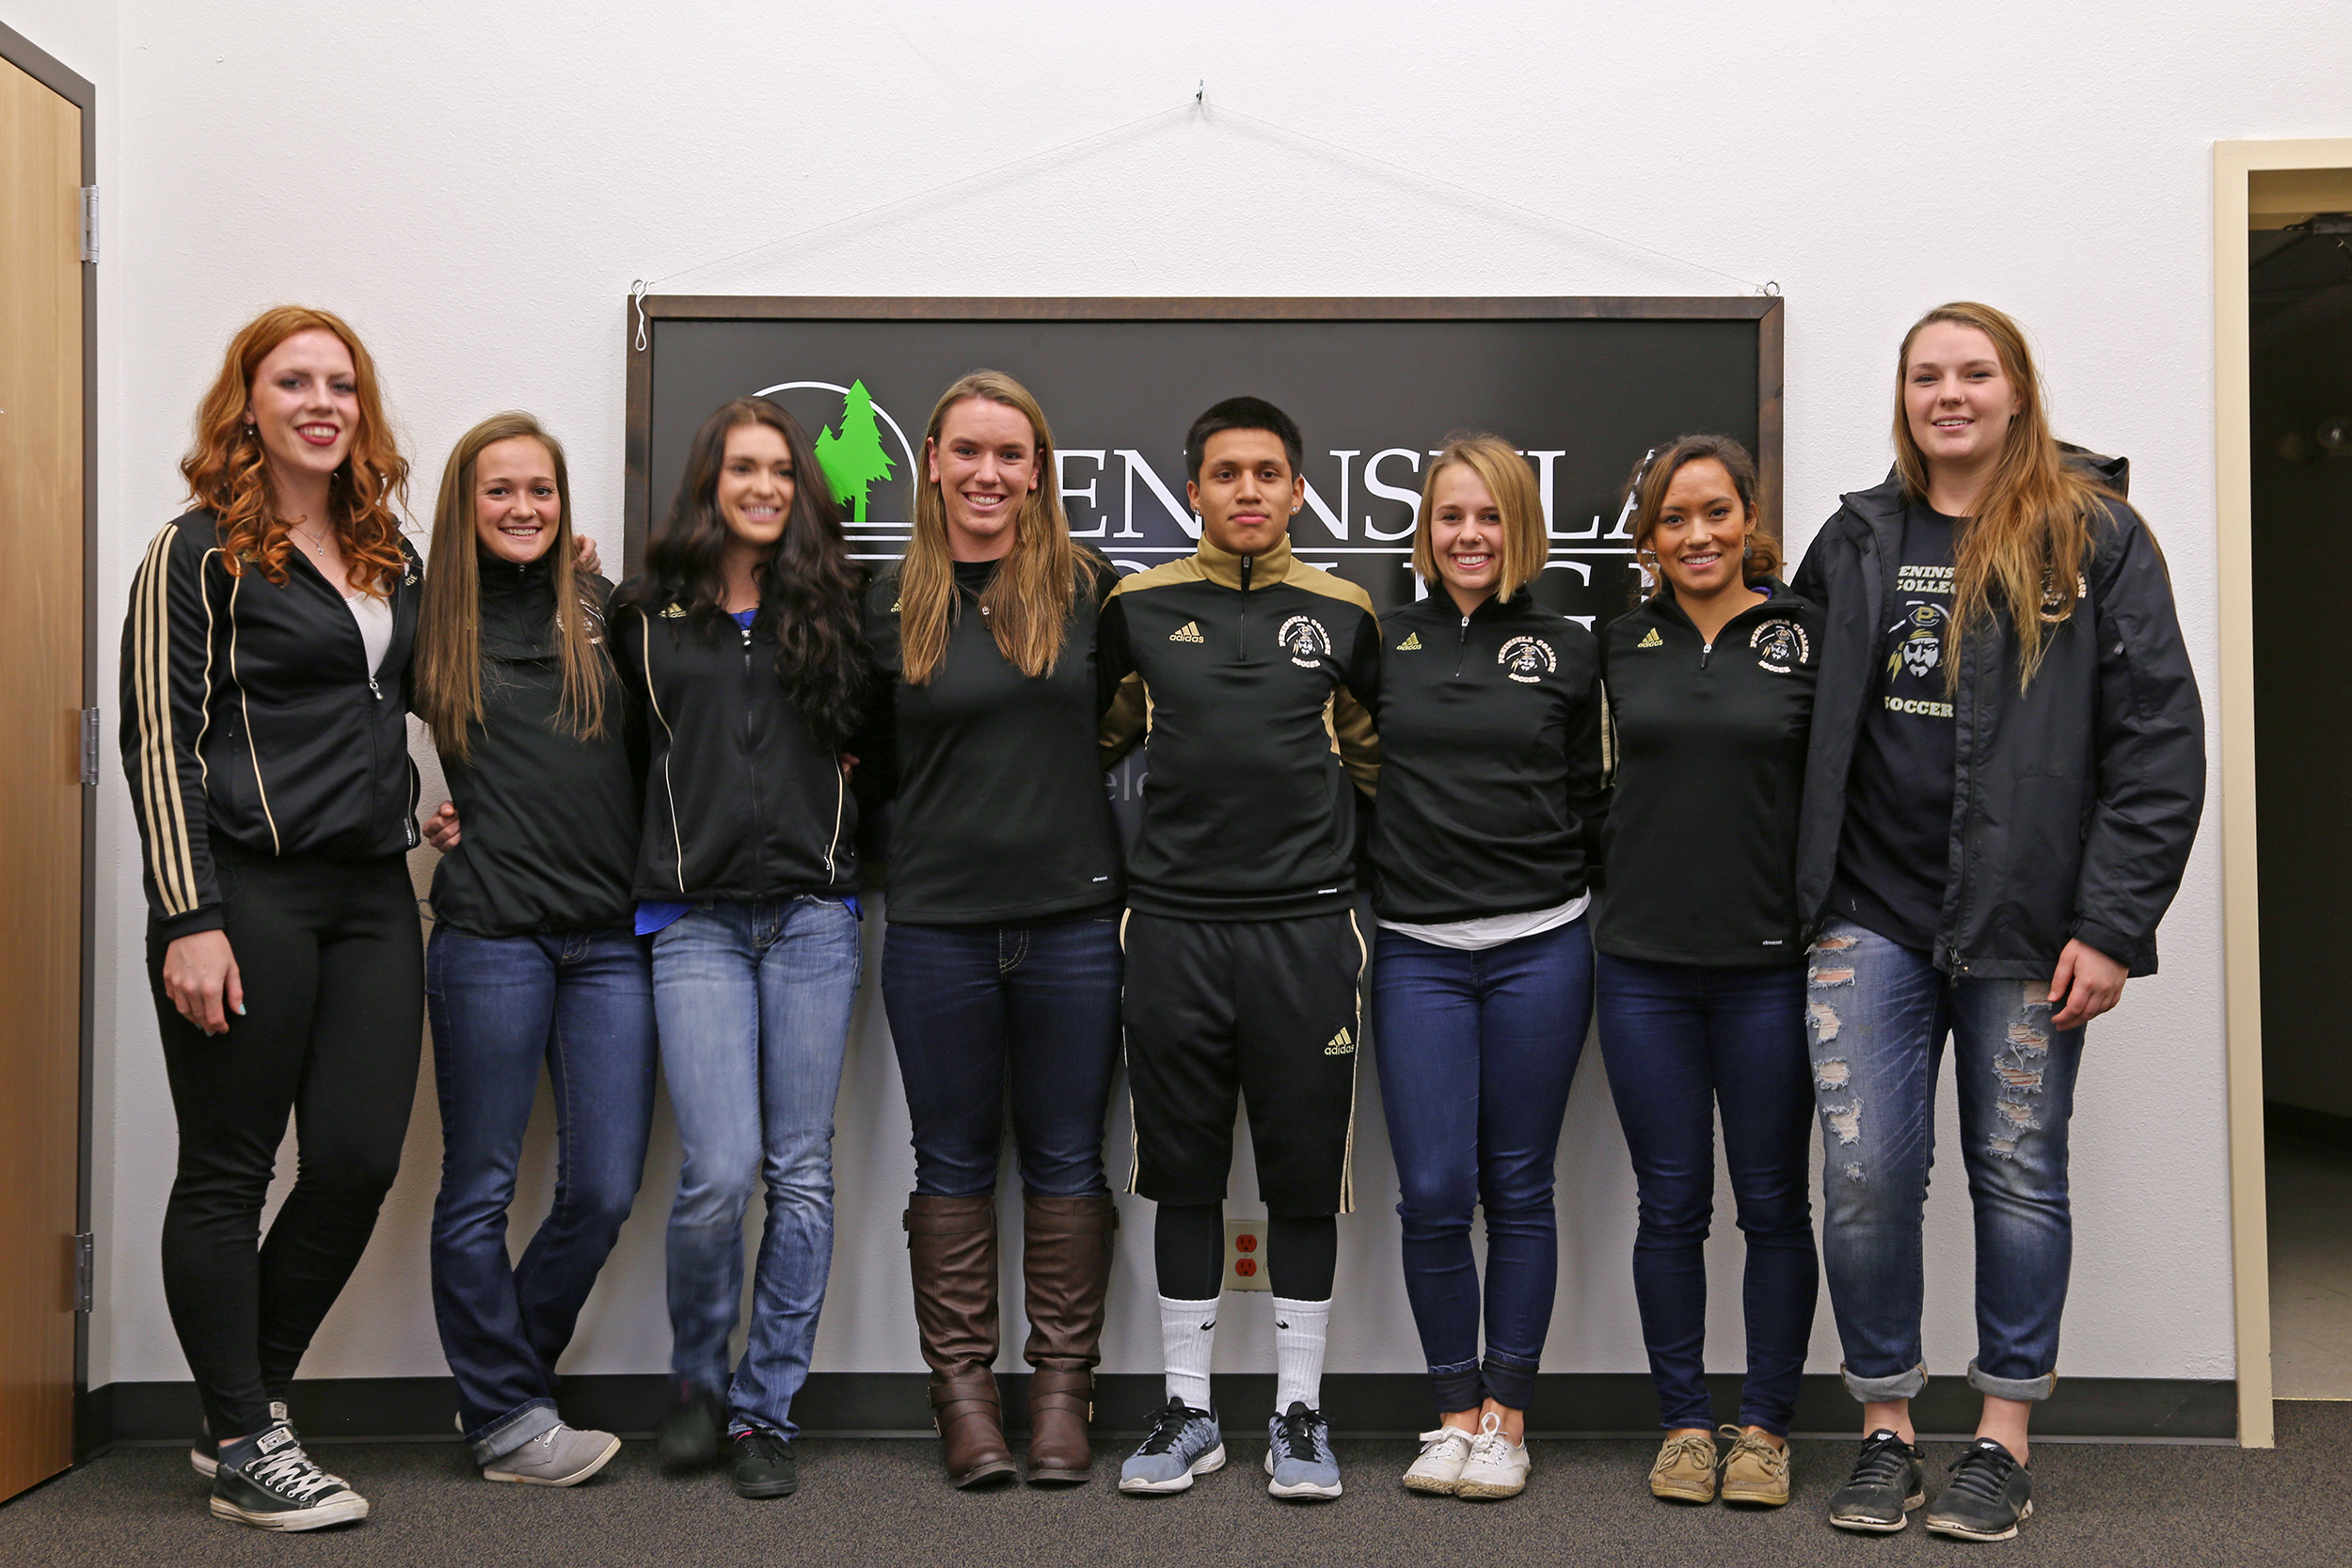 Peninsula College soccer players who signed letters of intent to play at four-year universities include